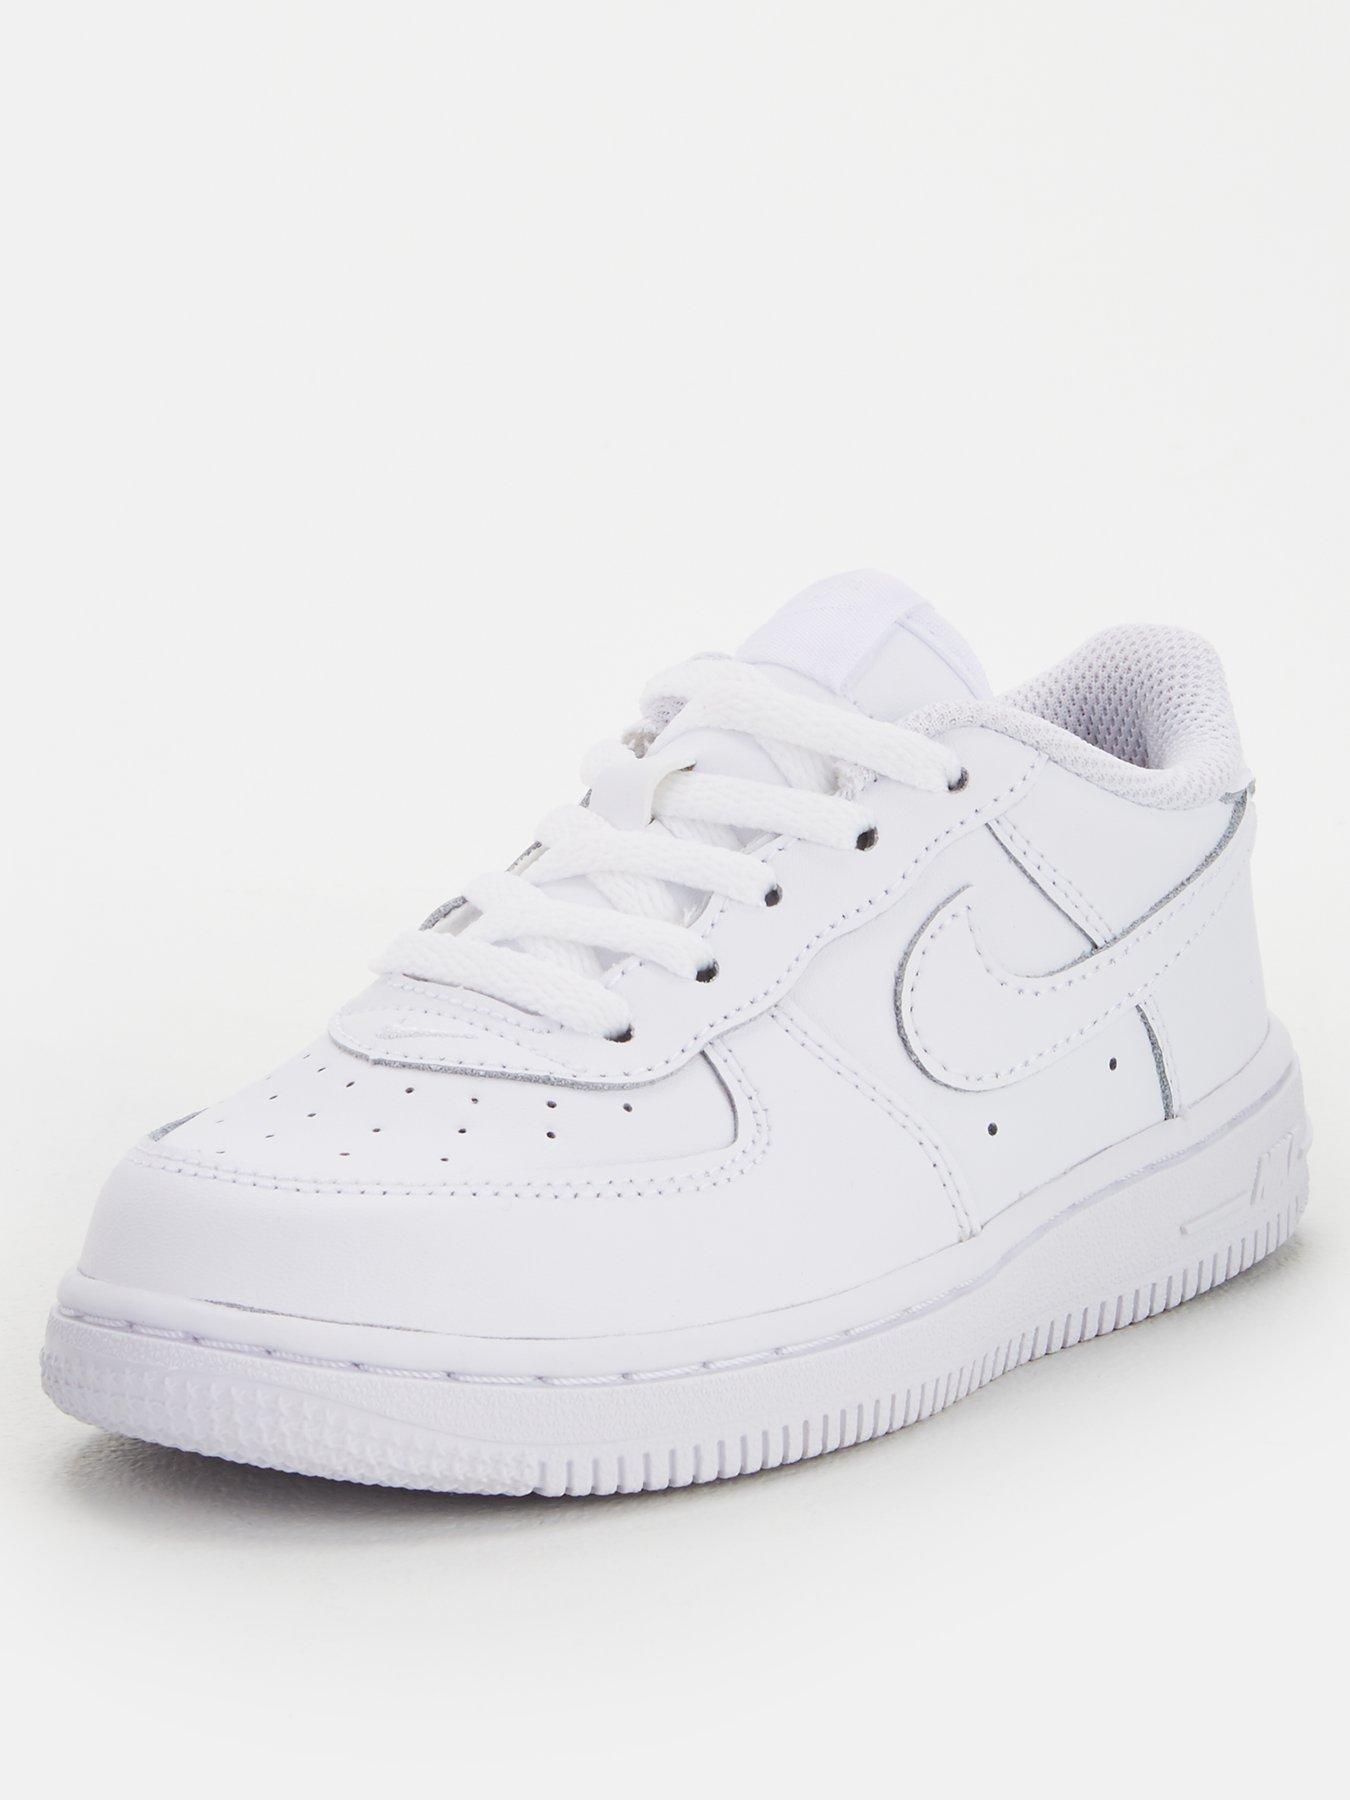 air force 1 junior size 4